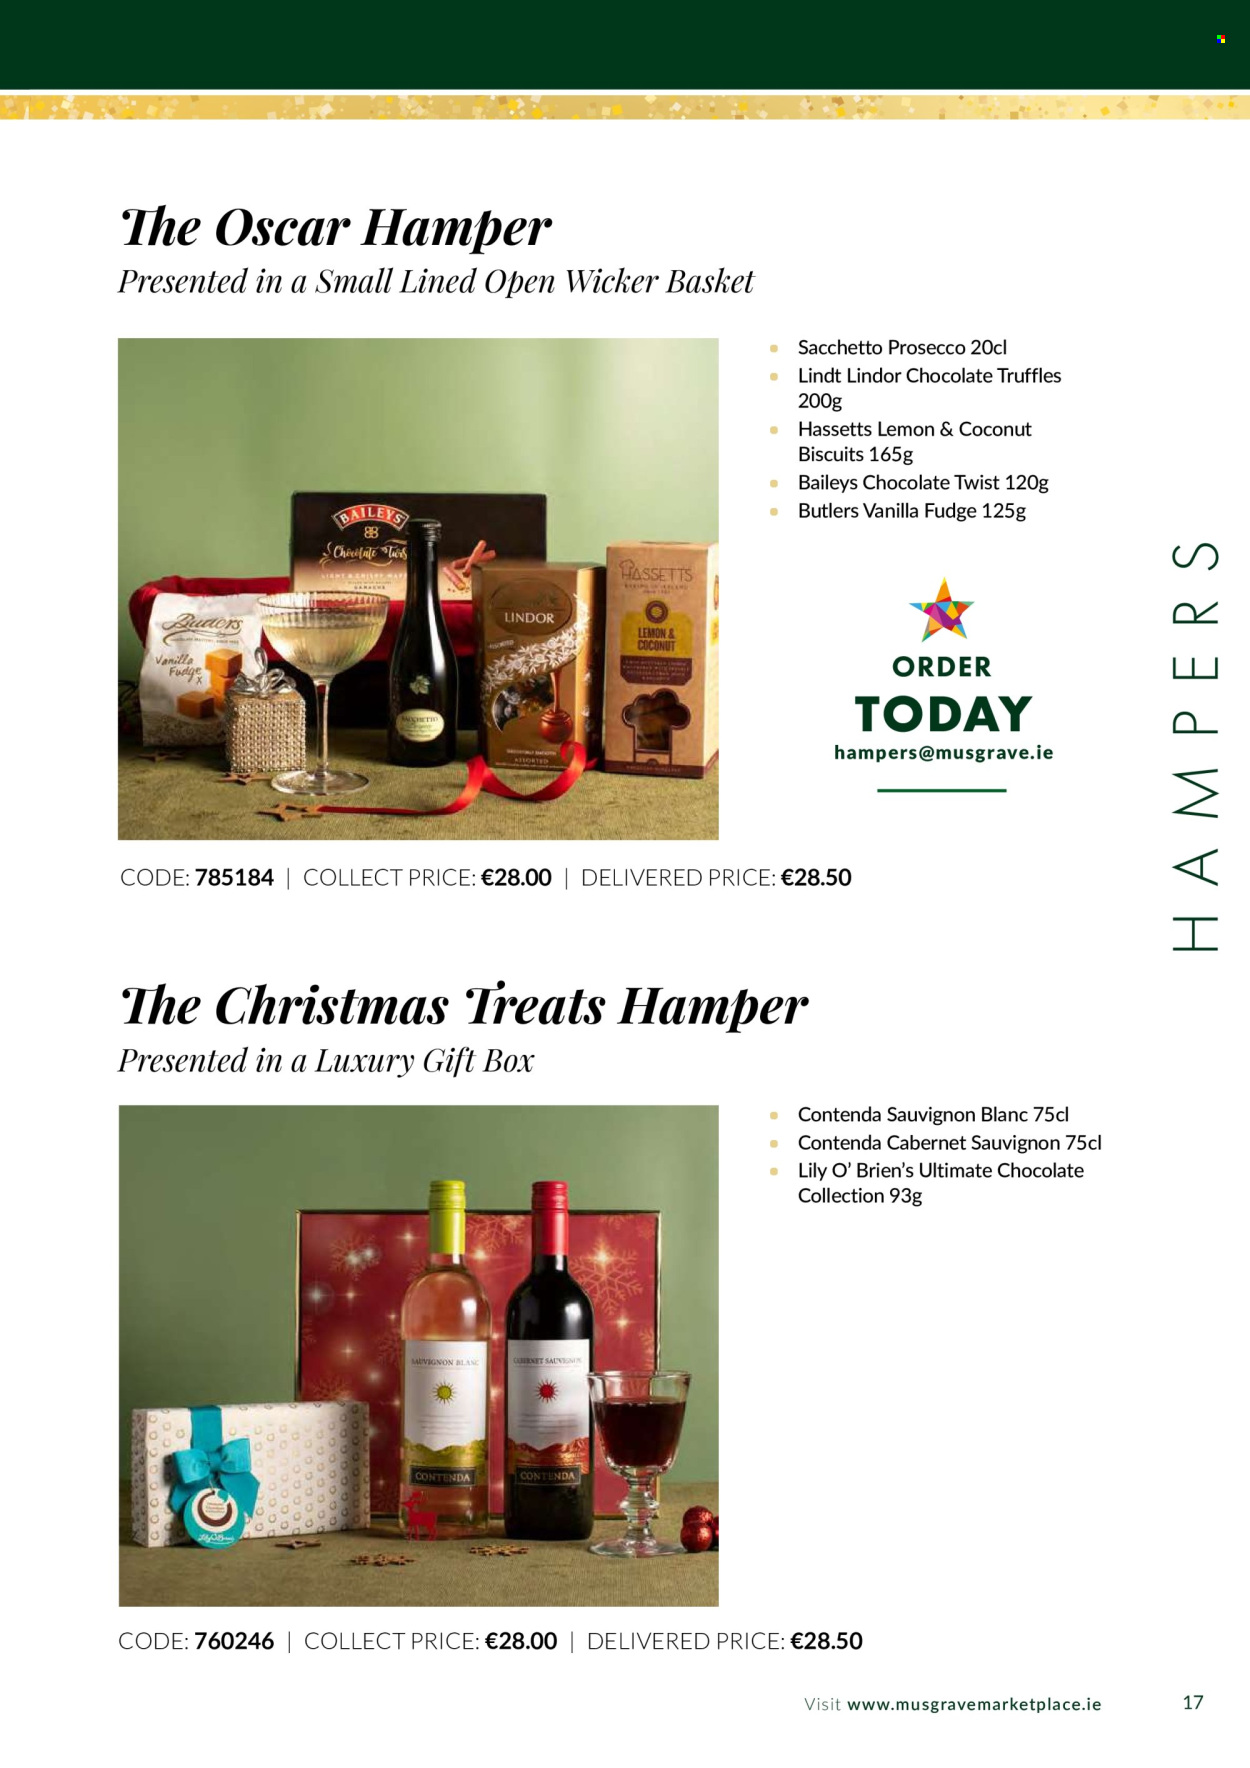 thumbnail - MUSGRAVE Market Place offer  - 19.08.2022 - 31.12.2022 - Sales products - hamper, fudge, chocolate, Lindt, Lindor, truffles, biscuit, Cabernet Sauvignon, red wine, white wine, prosecco, wine, Sauvignon Blanc, Baileys, basket, gift box. Page 17.